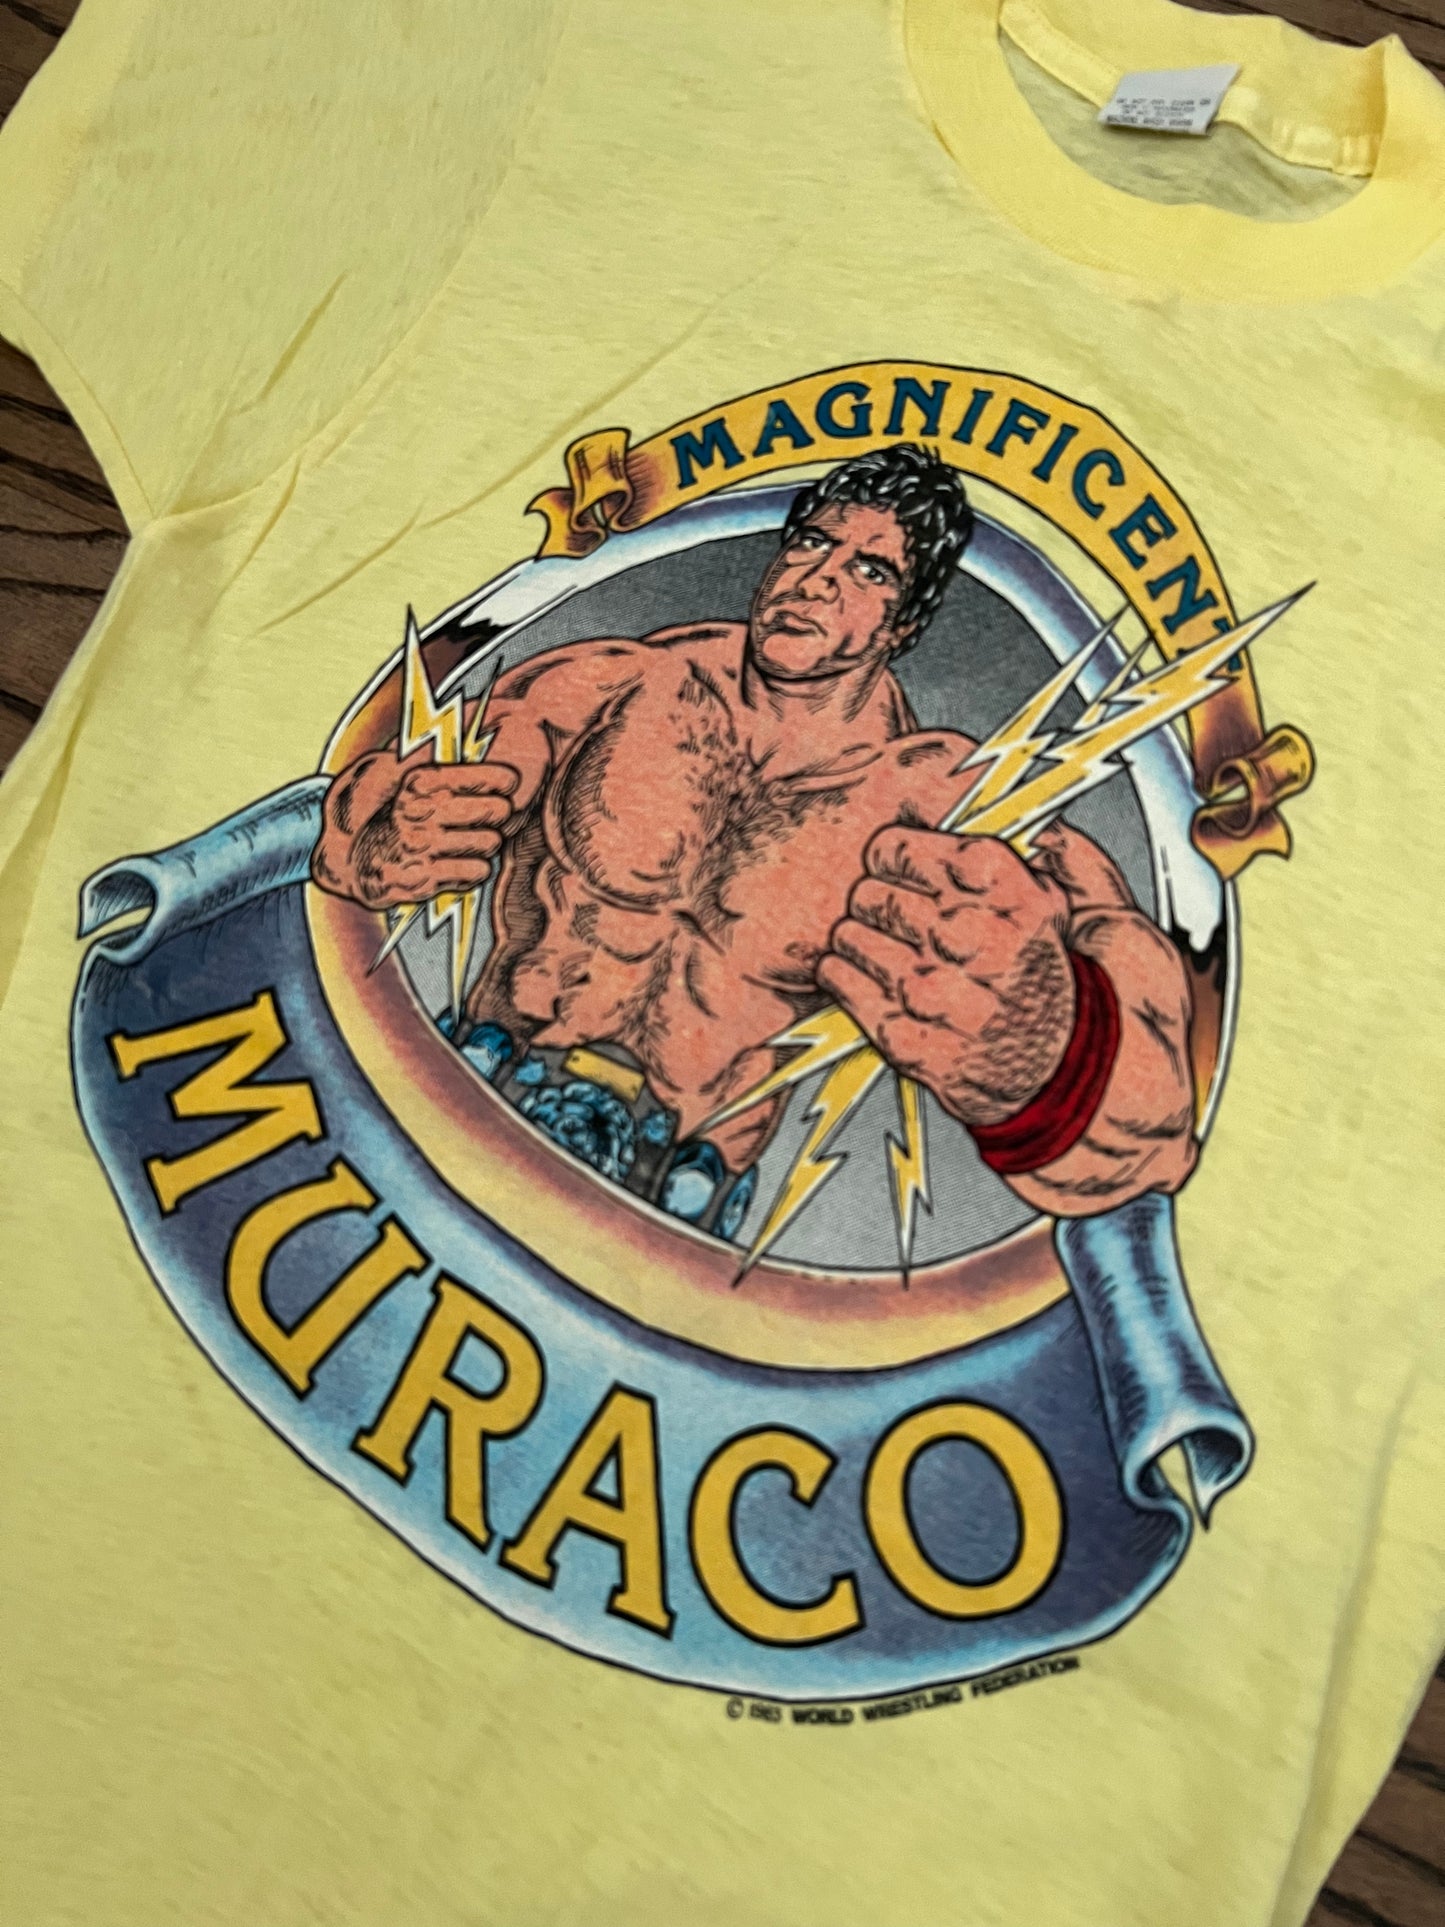 1983 WWF “The Magnificent” Don Muraco shirt